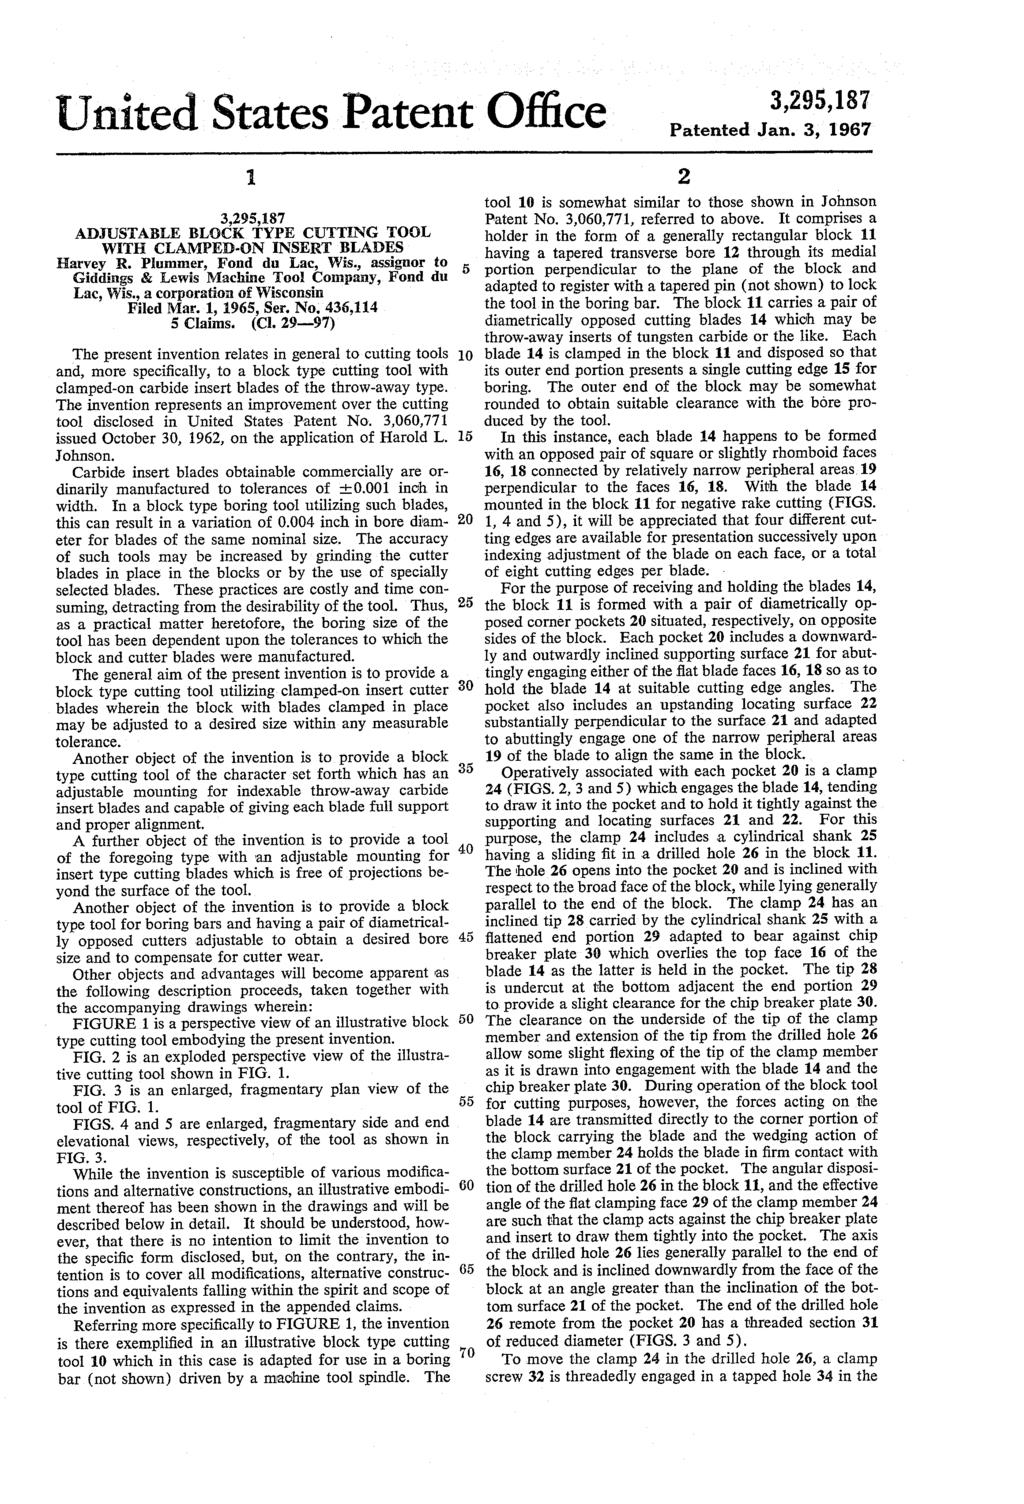 United States Patent Office Patented Jan. 3, 1967 Harvey R. Plummer, Fond du Lac, Wis., assignor to Giddings & Lewis Machine Too! Company, Fond du Lac, Wis., a corporation of Wisconsin Filed Mar.